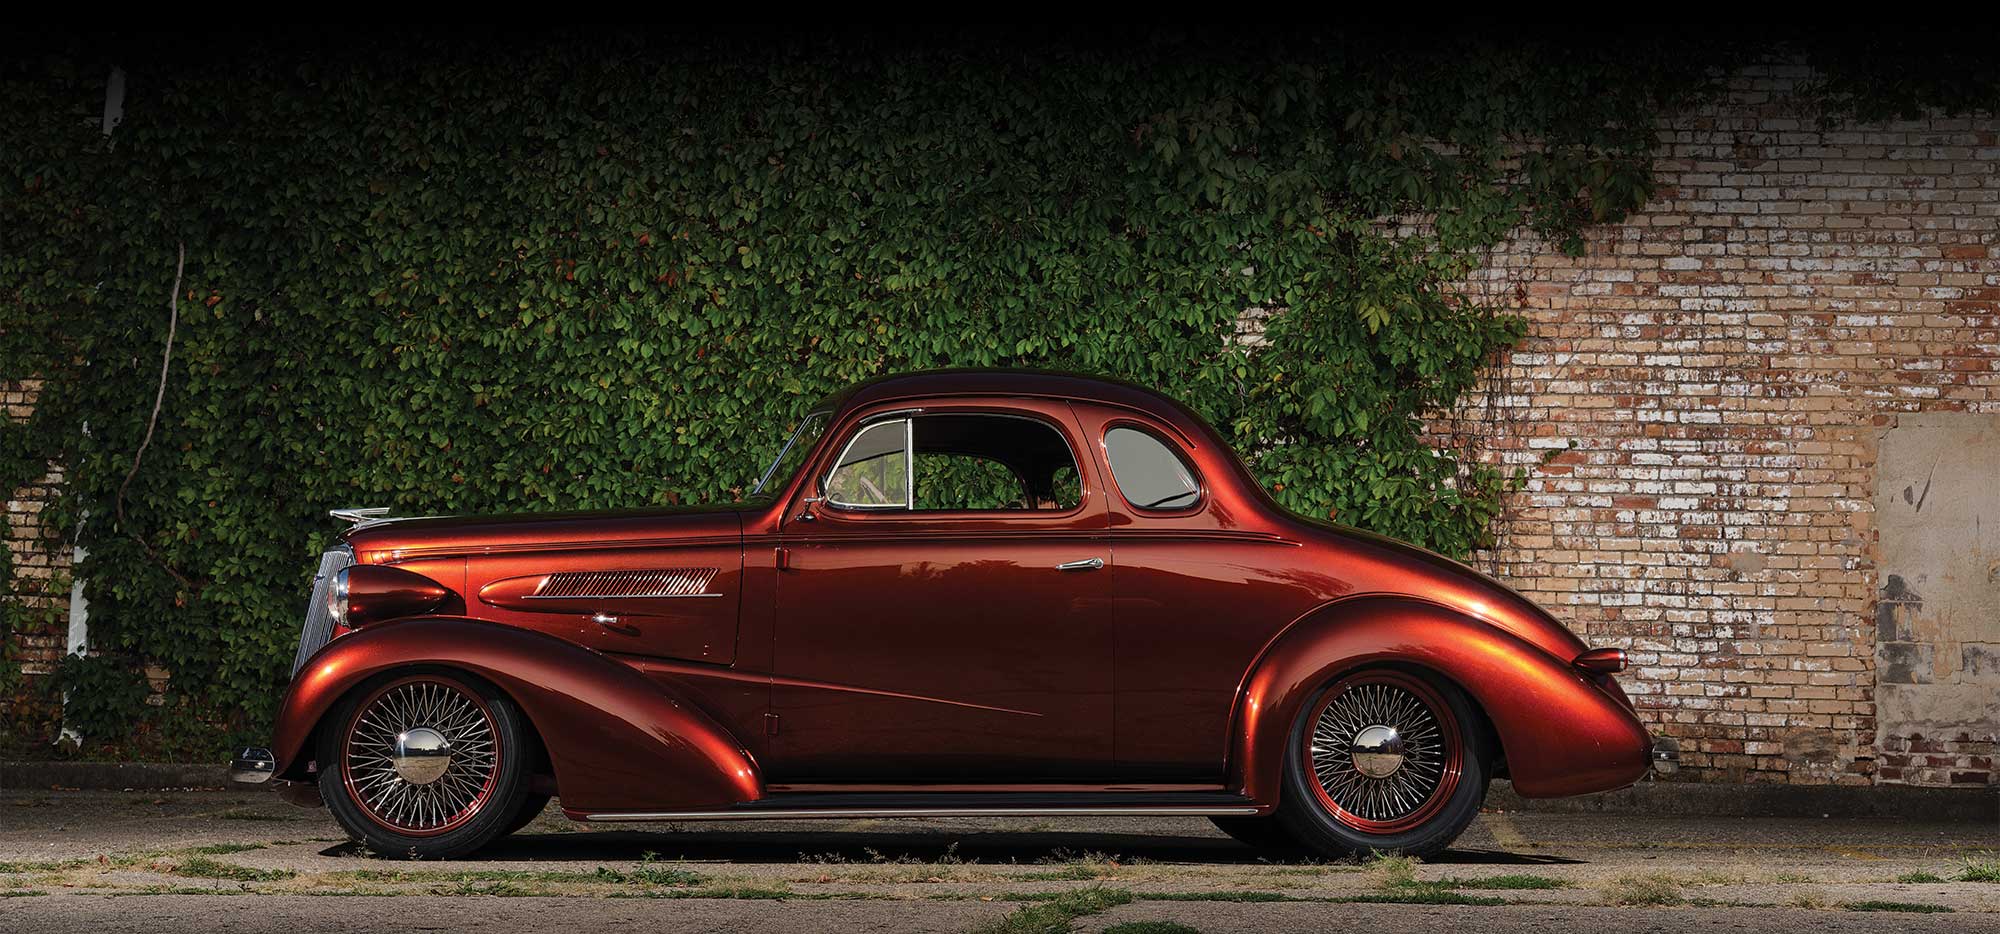 1937 Chevy Business Coupe restored with red paint job